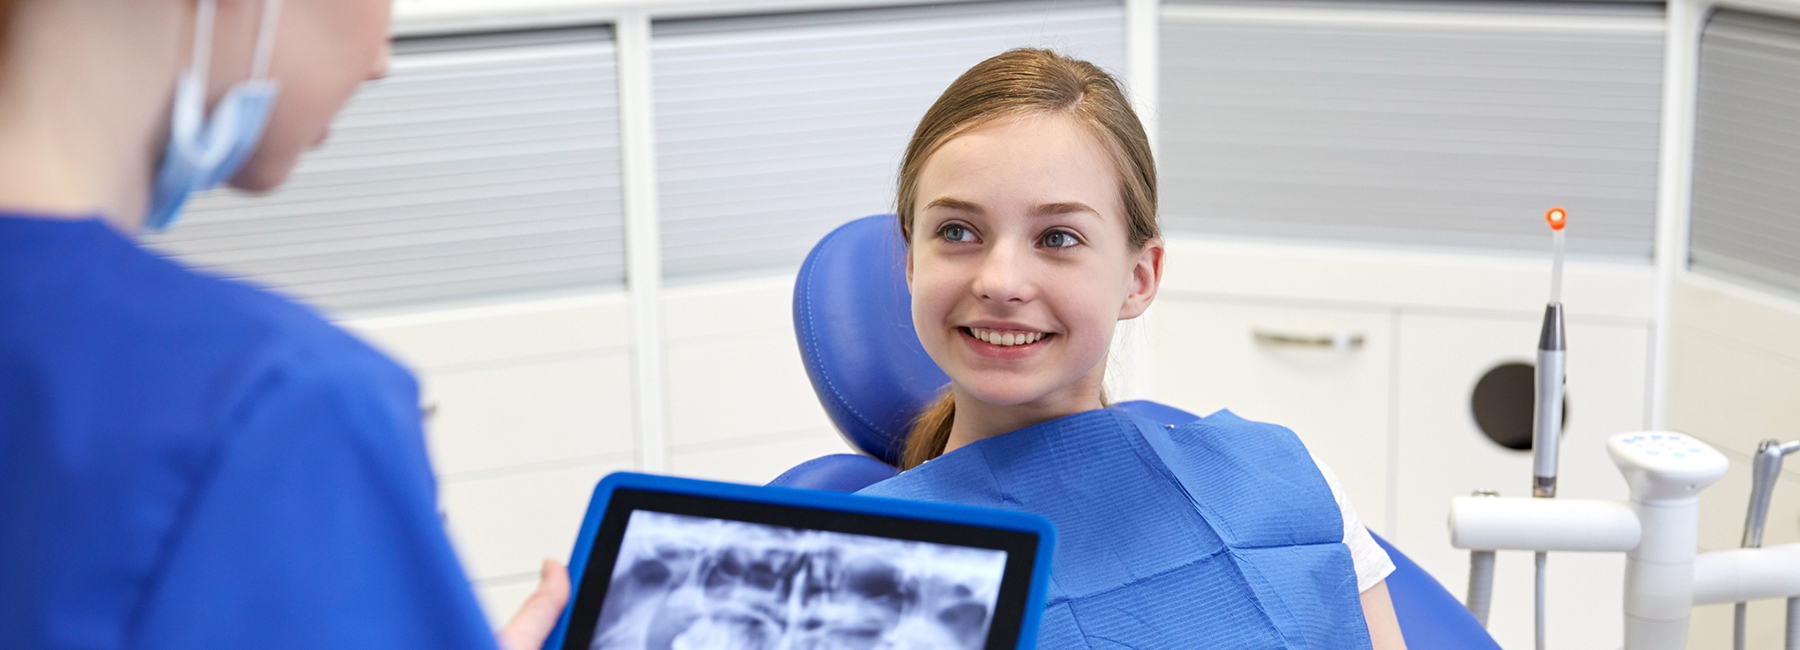 Our dentists provide wisdom teeth removal at our Waterdown dental clinic.